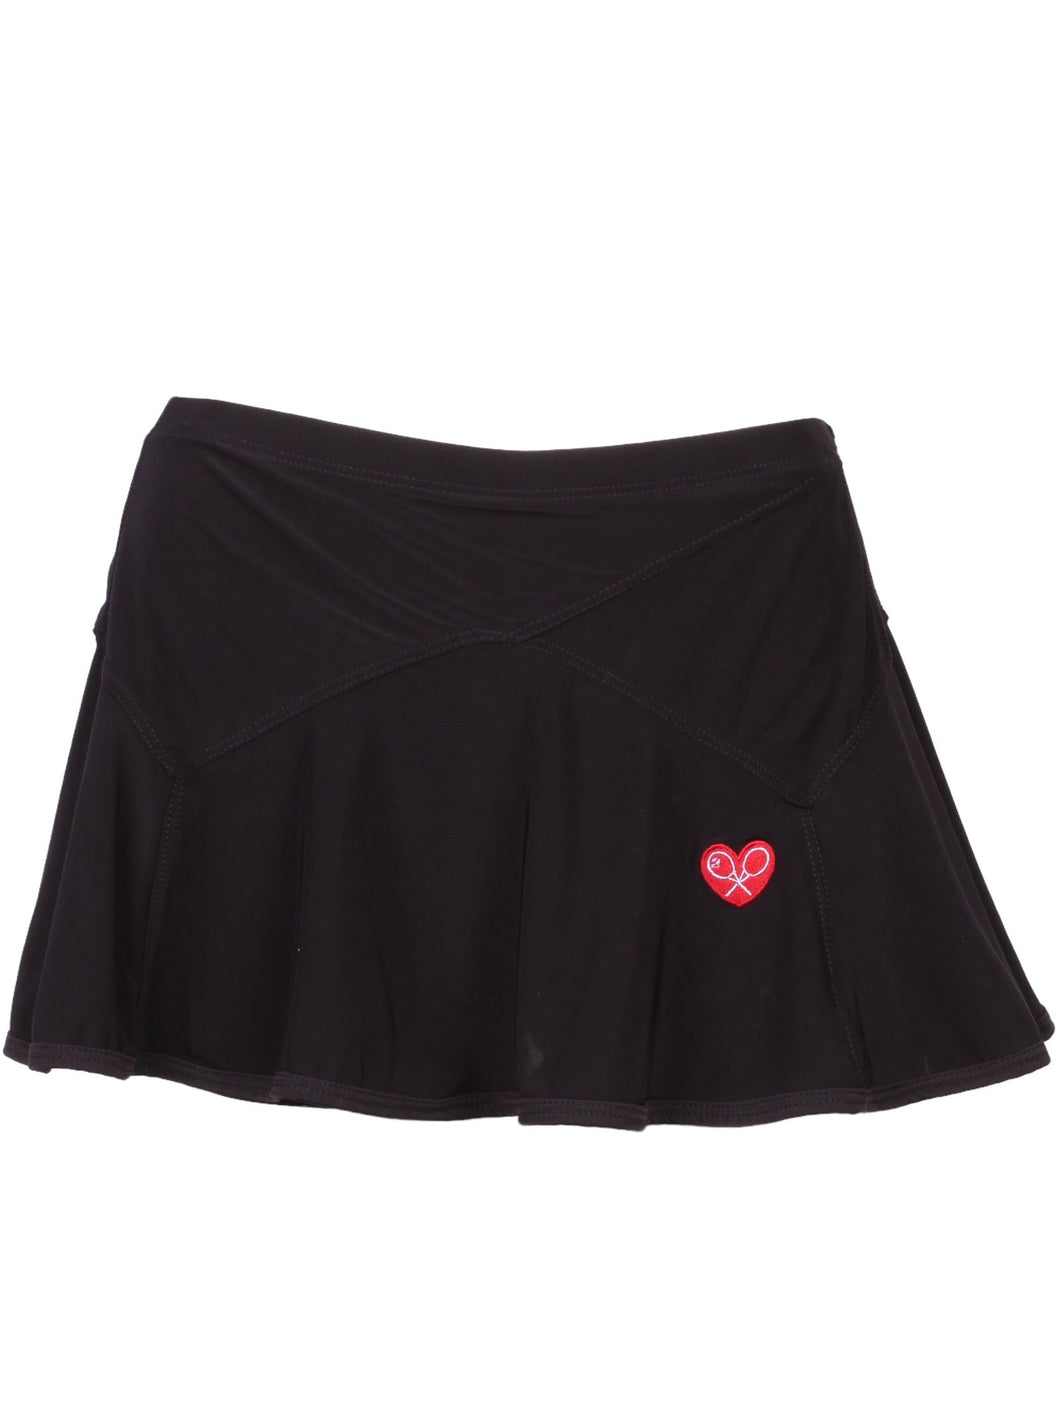 Triangle Black Skirt with Black Trim - I LOVE MY DOUBLES PARTNER!!!